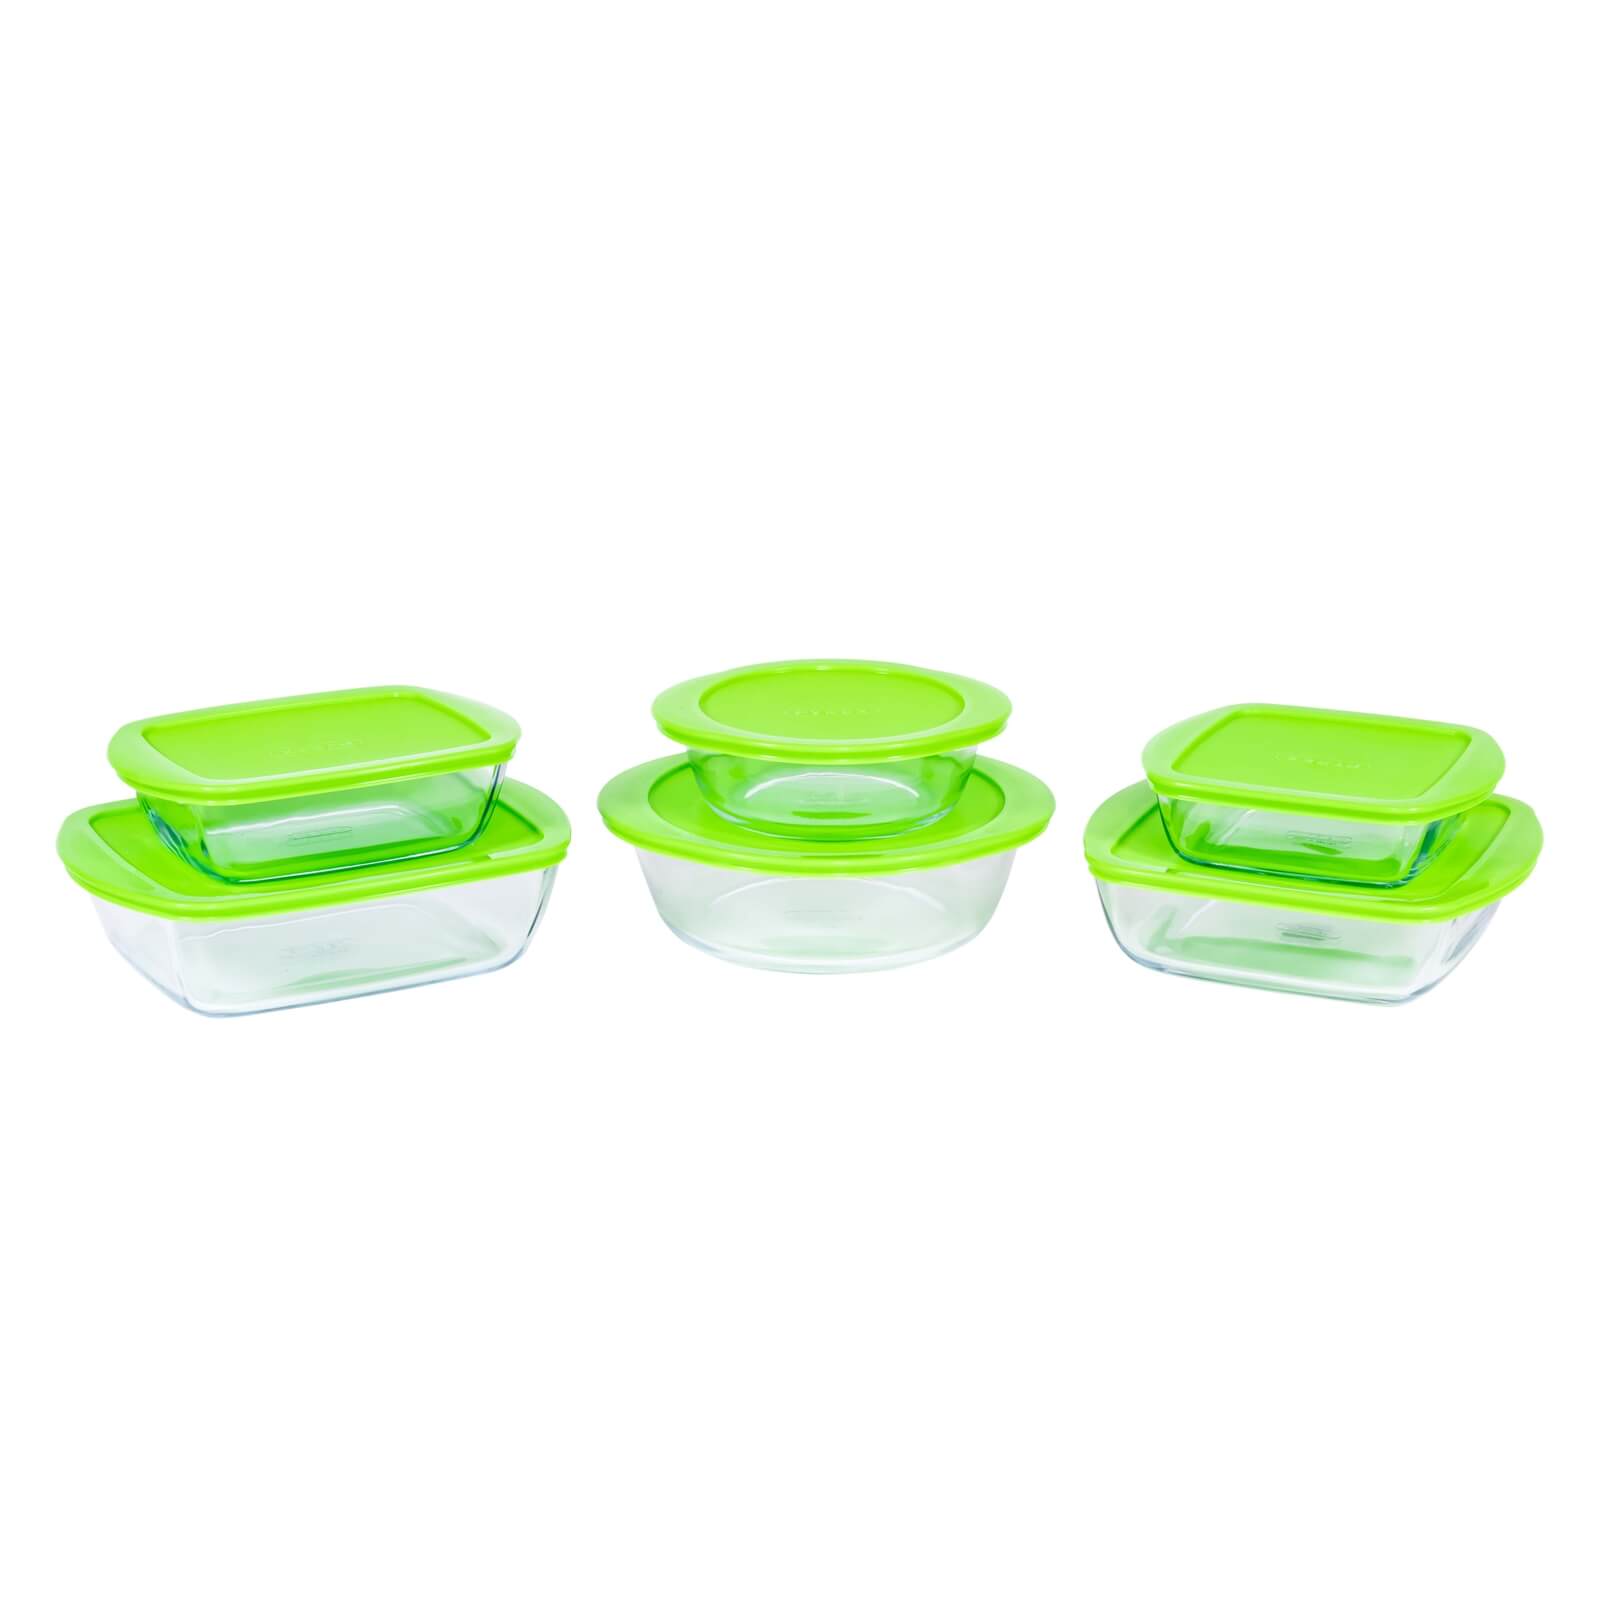 Photo of Pyrex Cook & Store 12 Piece Food Storage Set - Green